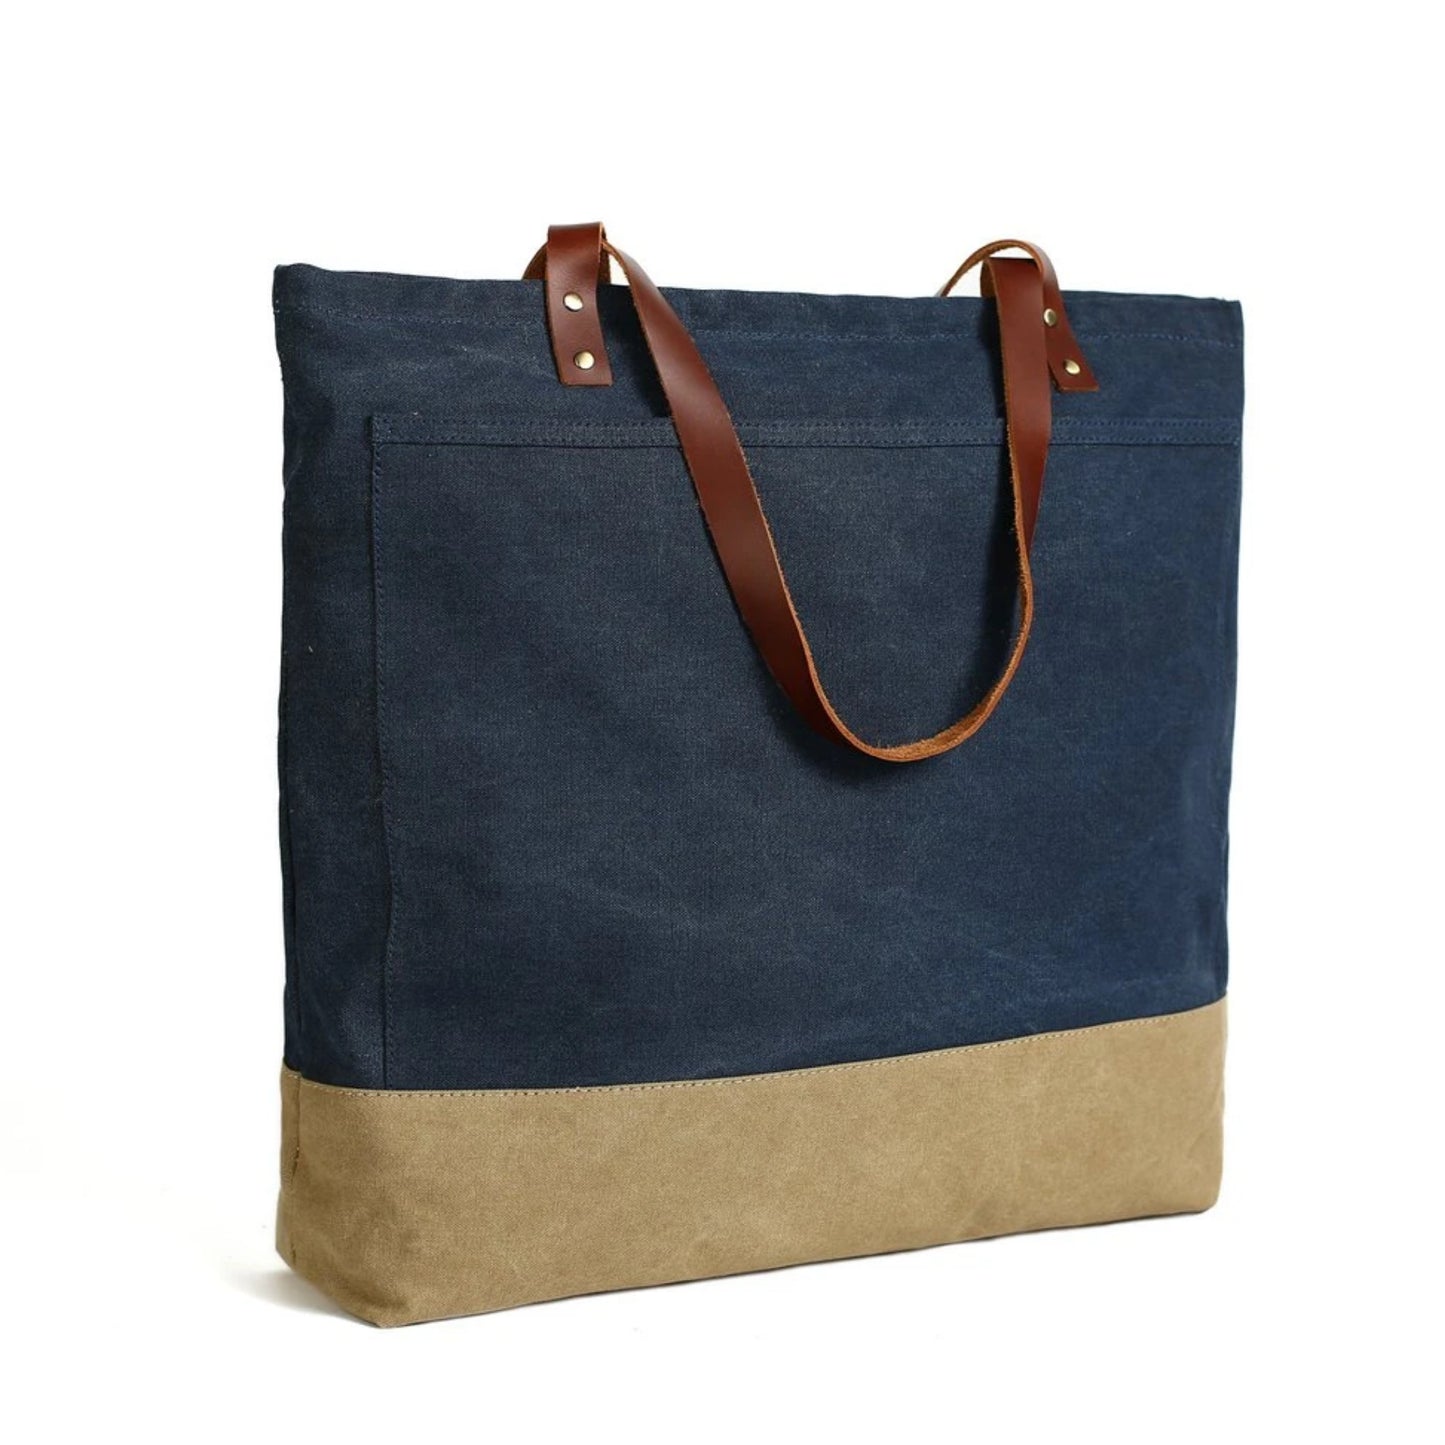 Handmade Canvas Tote Bag with Leather Handle - Blue Sebe Handmade Leather Bags